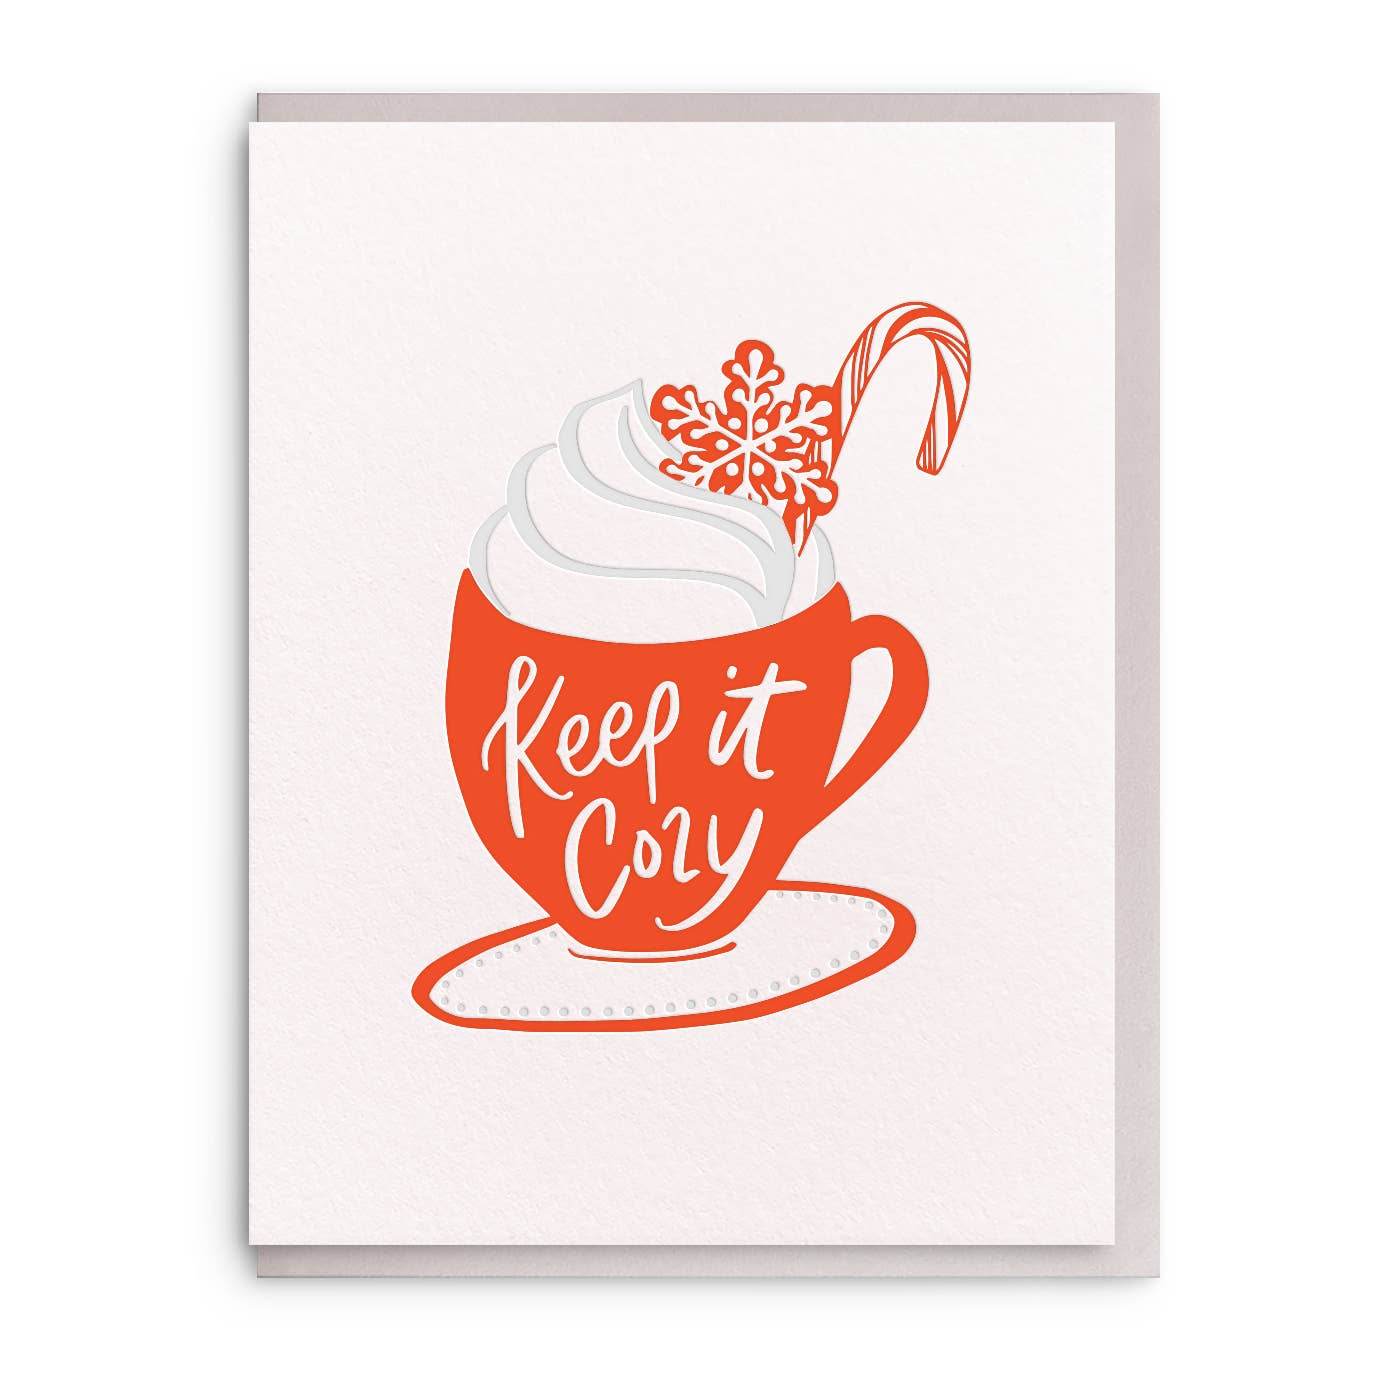 Keep It Cozy - Letterpress Holiday Greeting Card